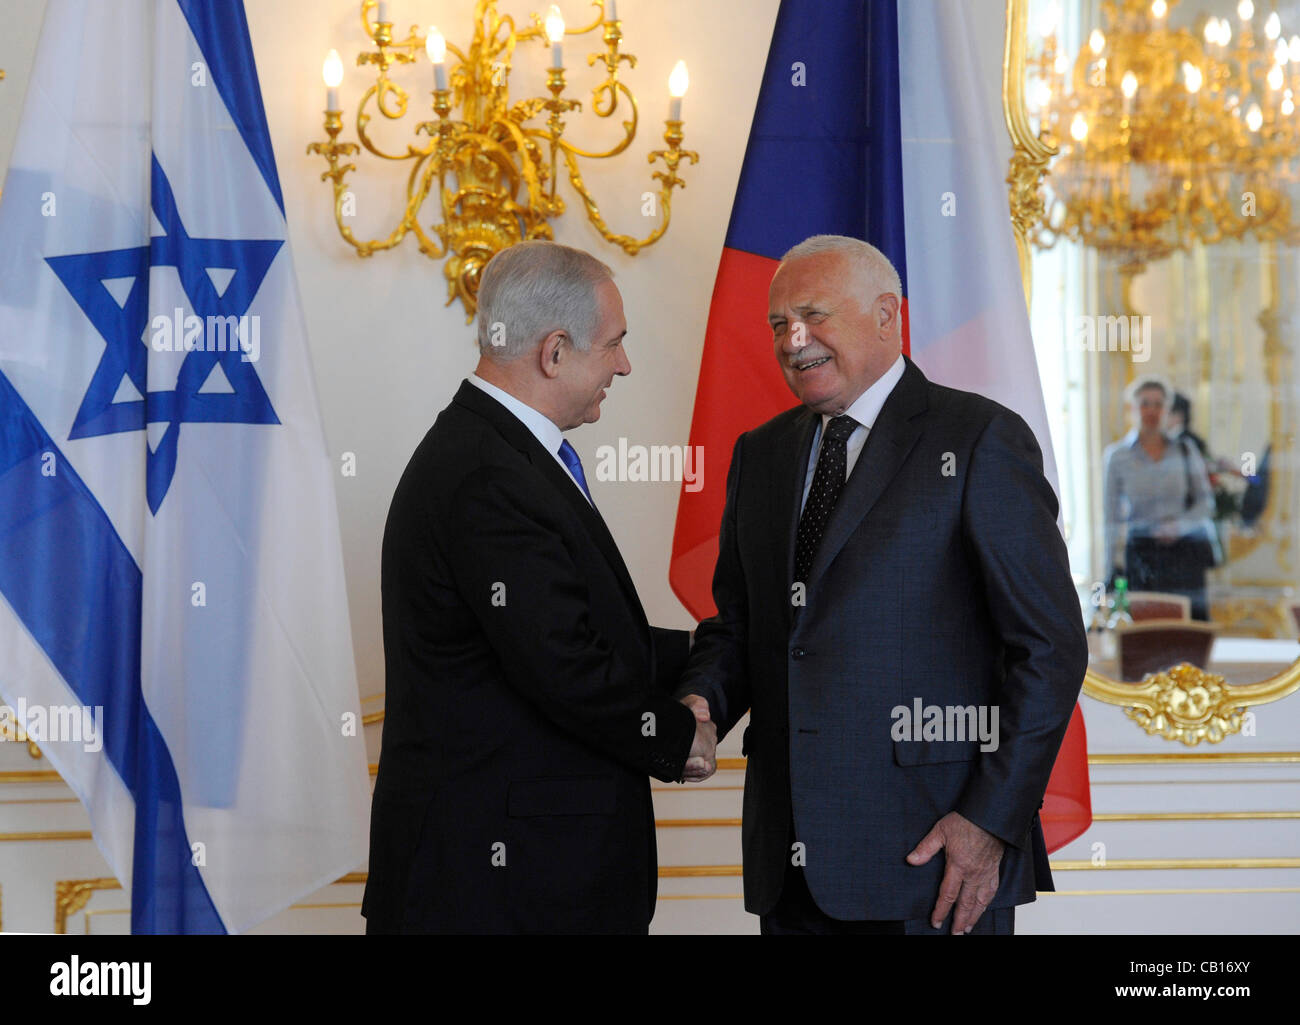 Israeli Prime Minister Benjamin Netanyahu, left, meets Czech President Vaclav Klaus, right, at Prague Castle Friday, May 18, 2012. Netanyahu and several ministers of his government are in Prague for a two-day visit. (CTK Photo/Michal Kamaryt) Stock Photo